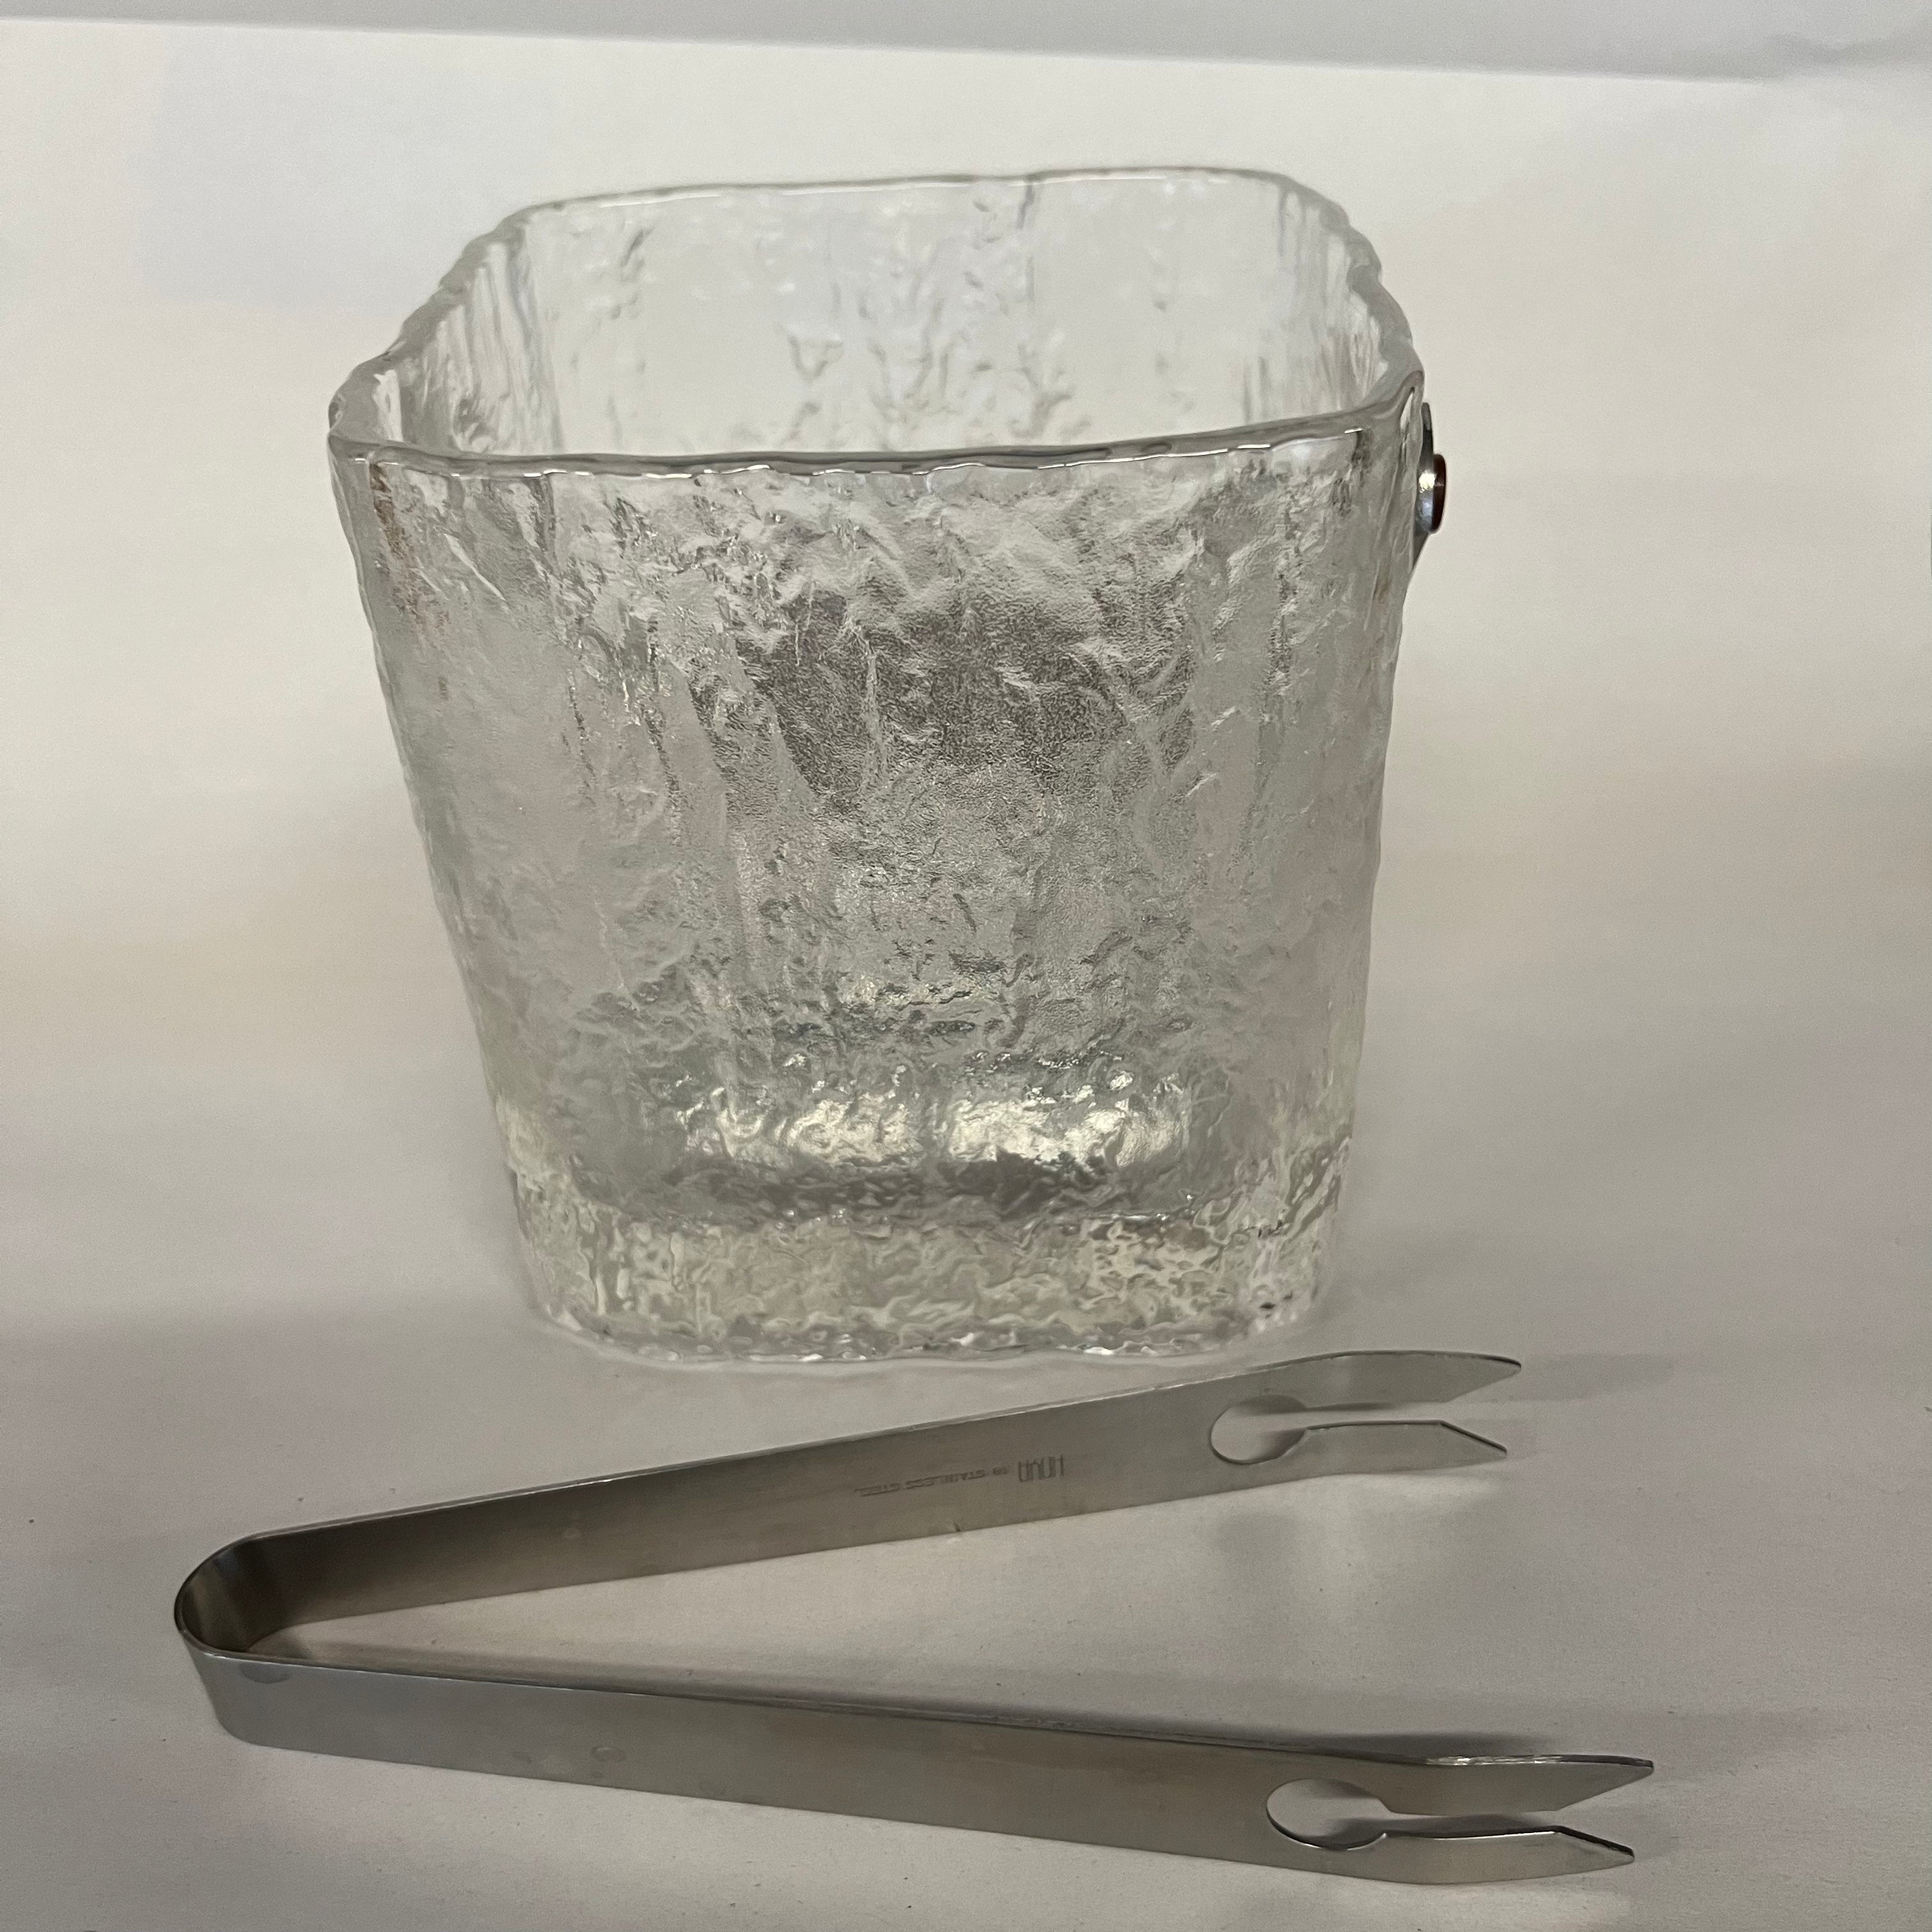 Hoya Japan Frosted Glass Ice Bucket and 6 Rocks Glasses